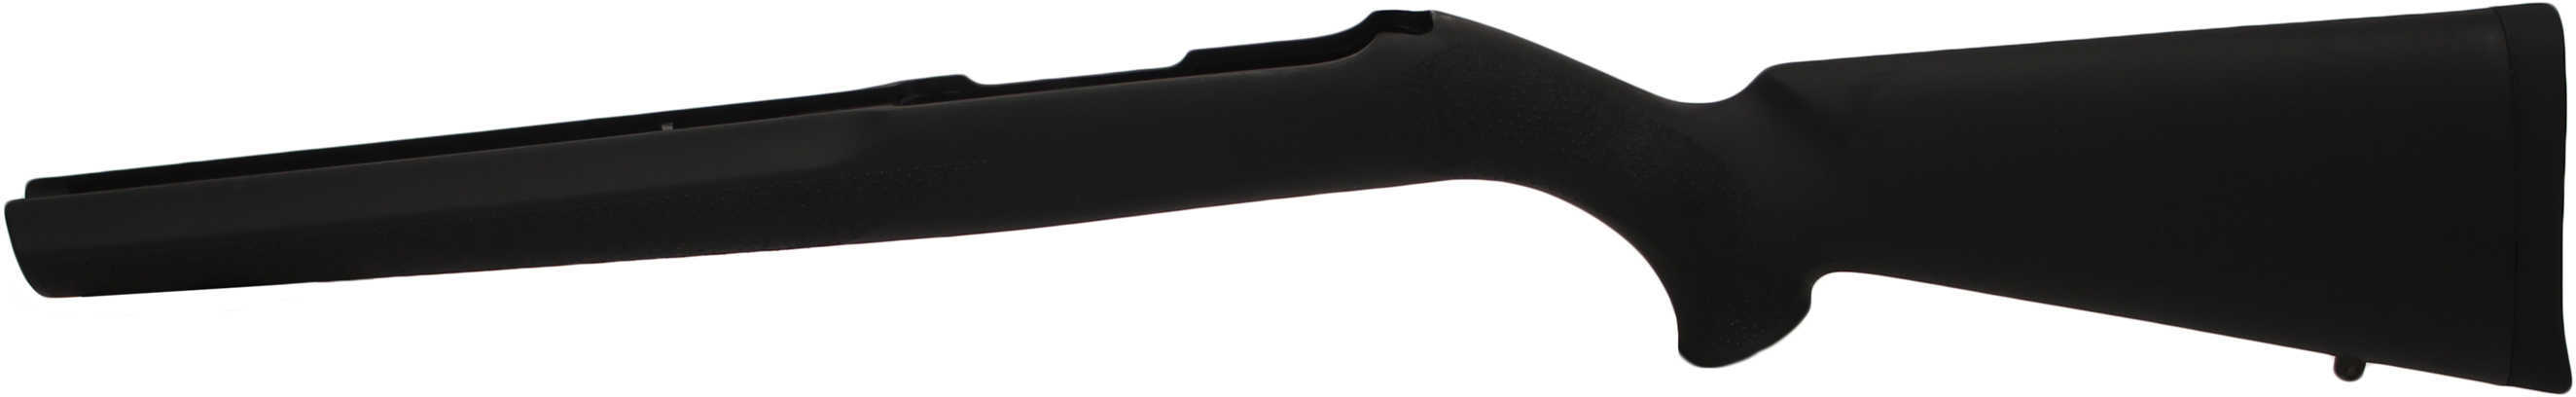 Hogue 22010 OverMolded Rifle Stock Ruger 10/22 with .920" Barrel Diameter Rubber Black